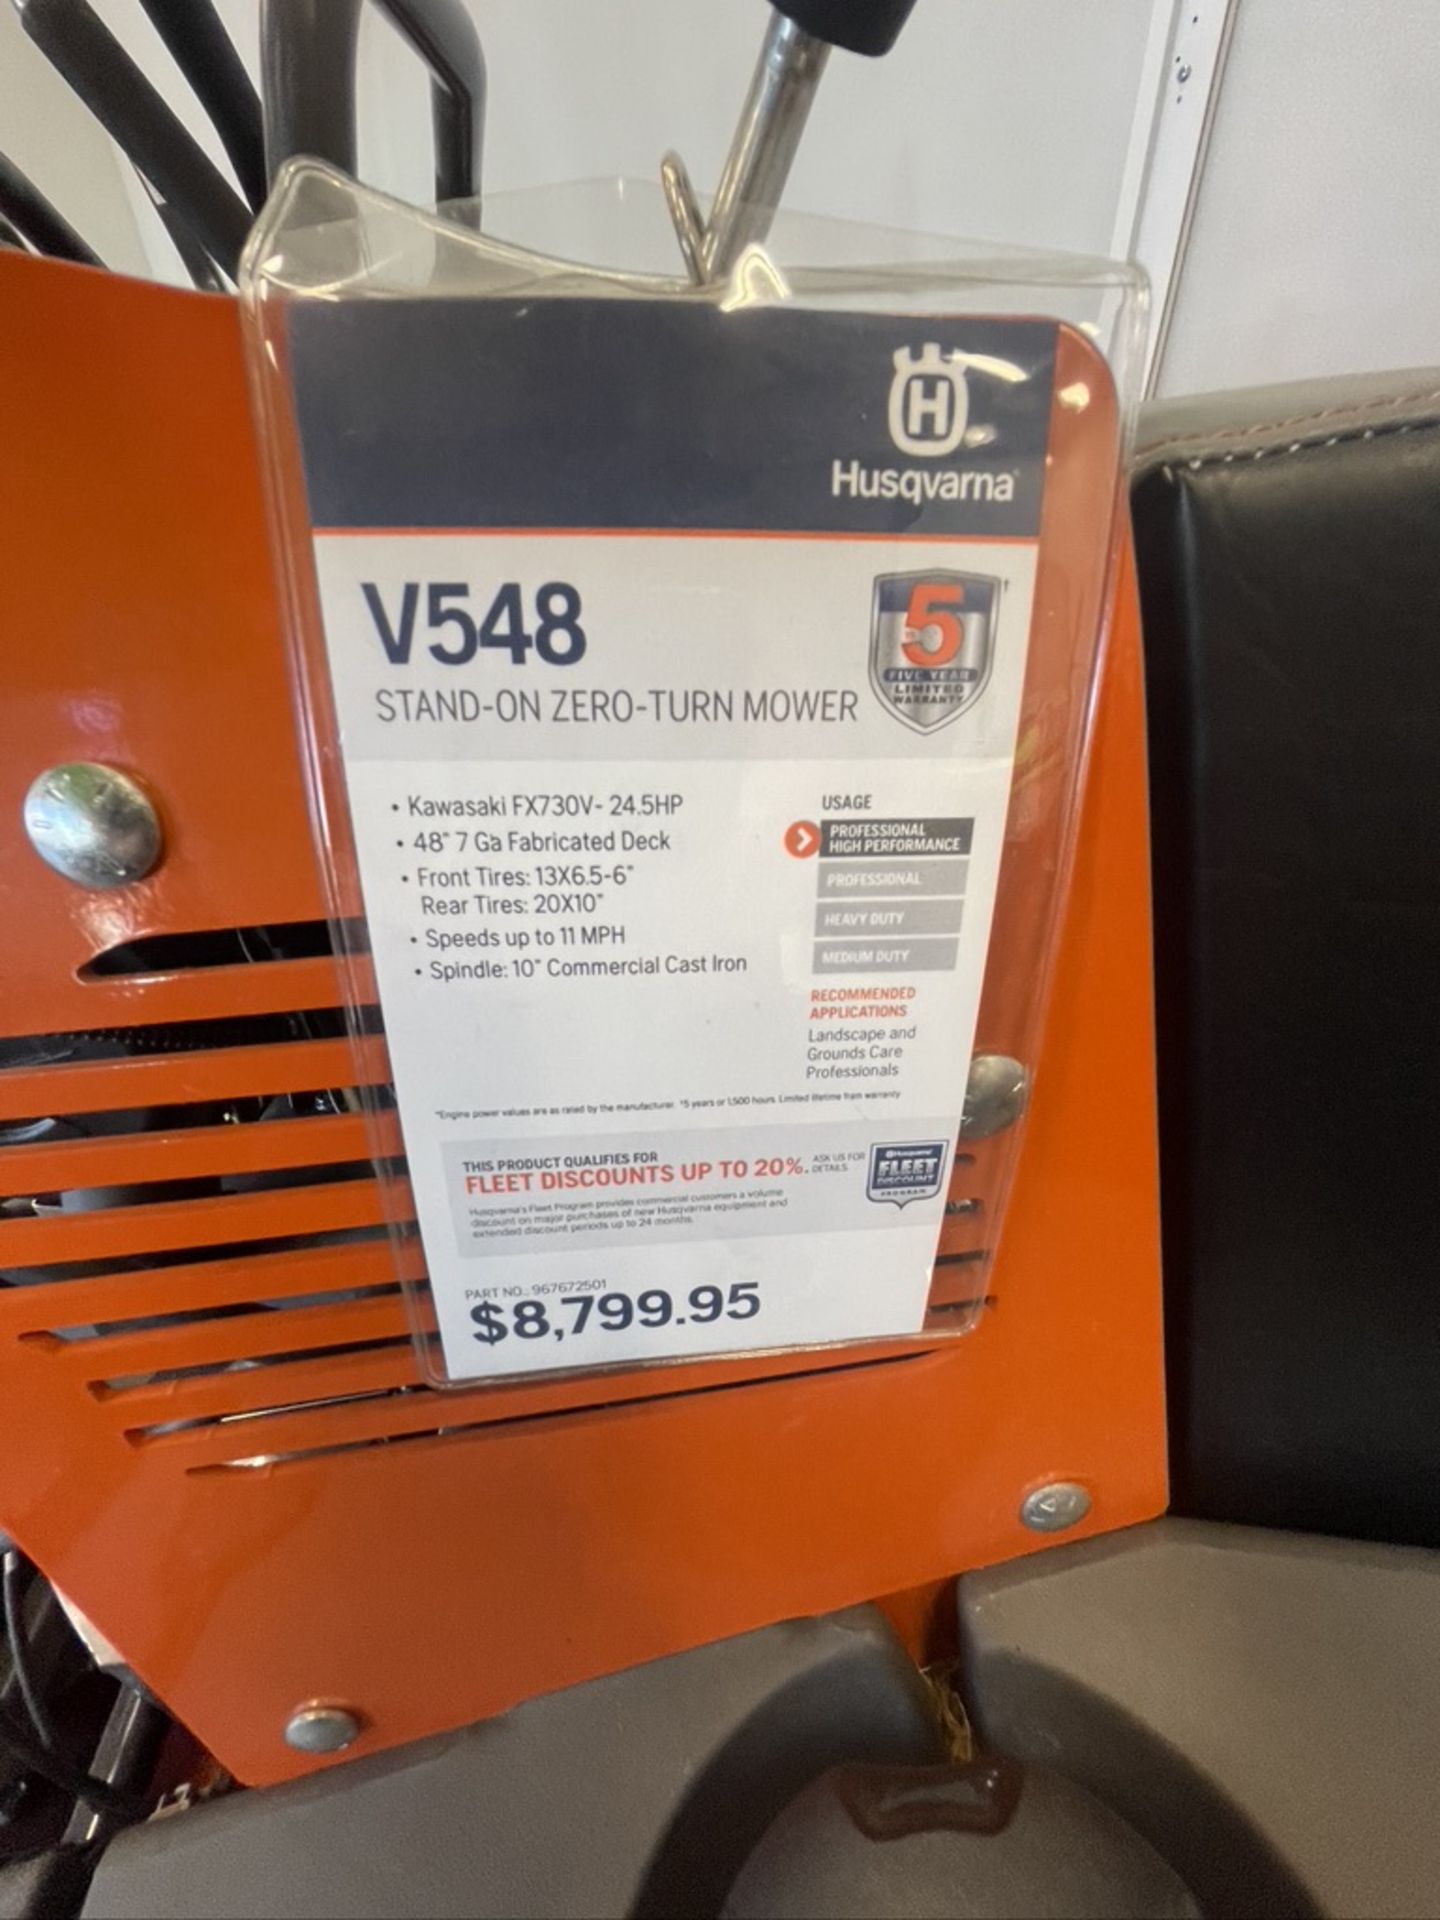 HUSQVARNA STAND-ON SERO-TURN MOWER, MODEL V548 (SEE TAG IN PHOTOS FOR MORE INFORMATION) (ALL - Image 6 of 6